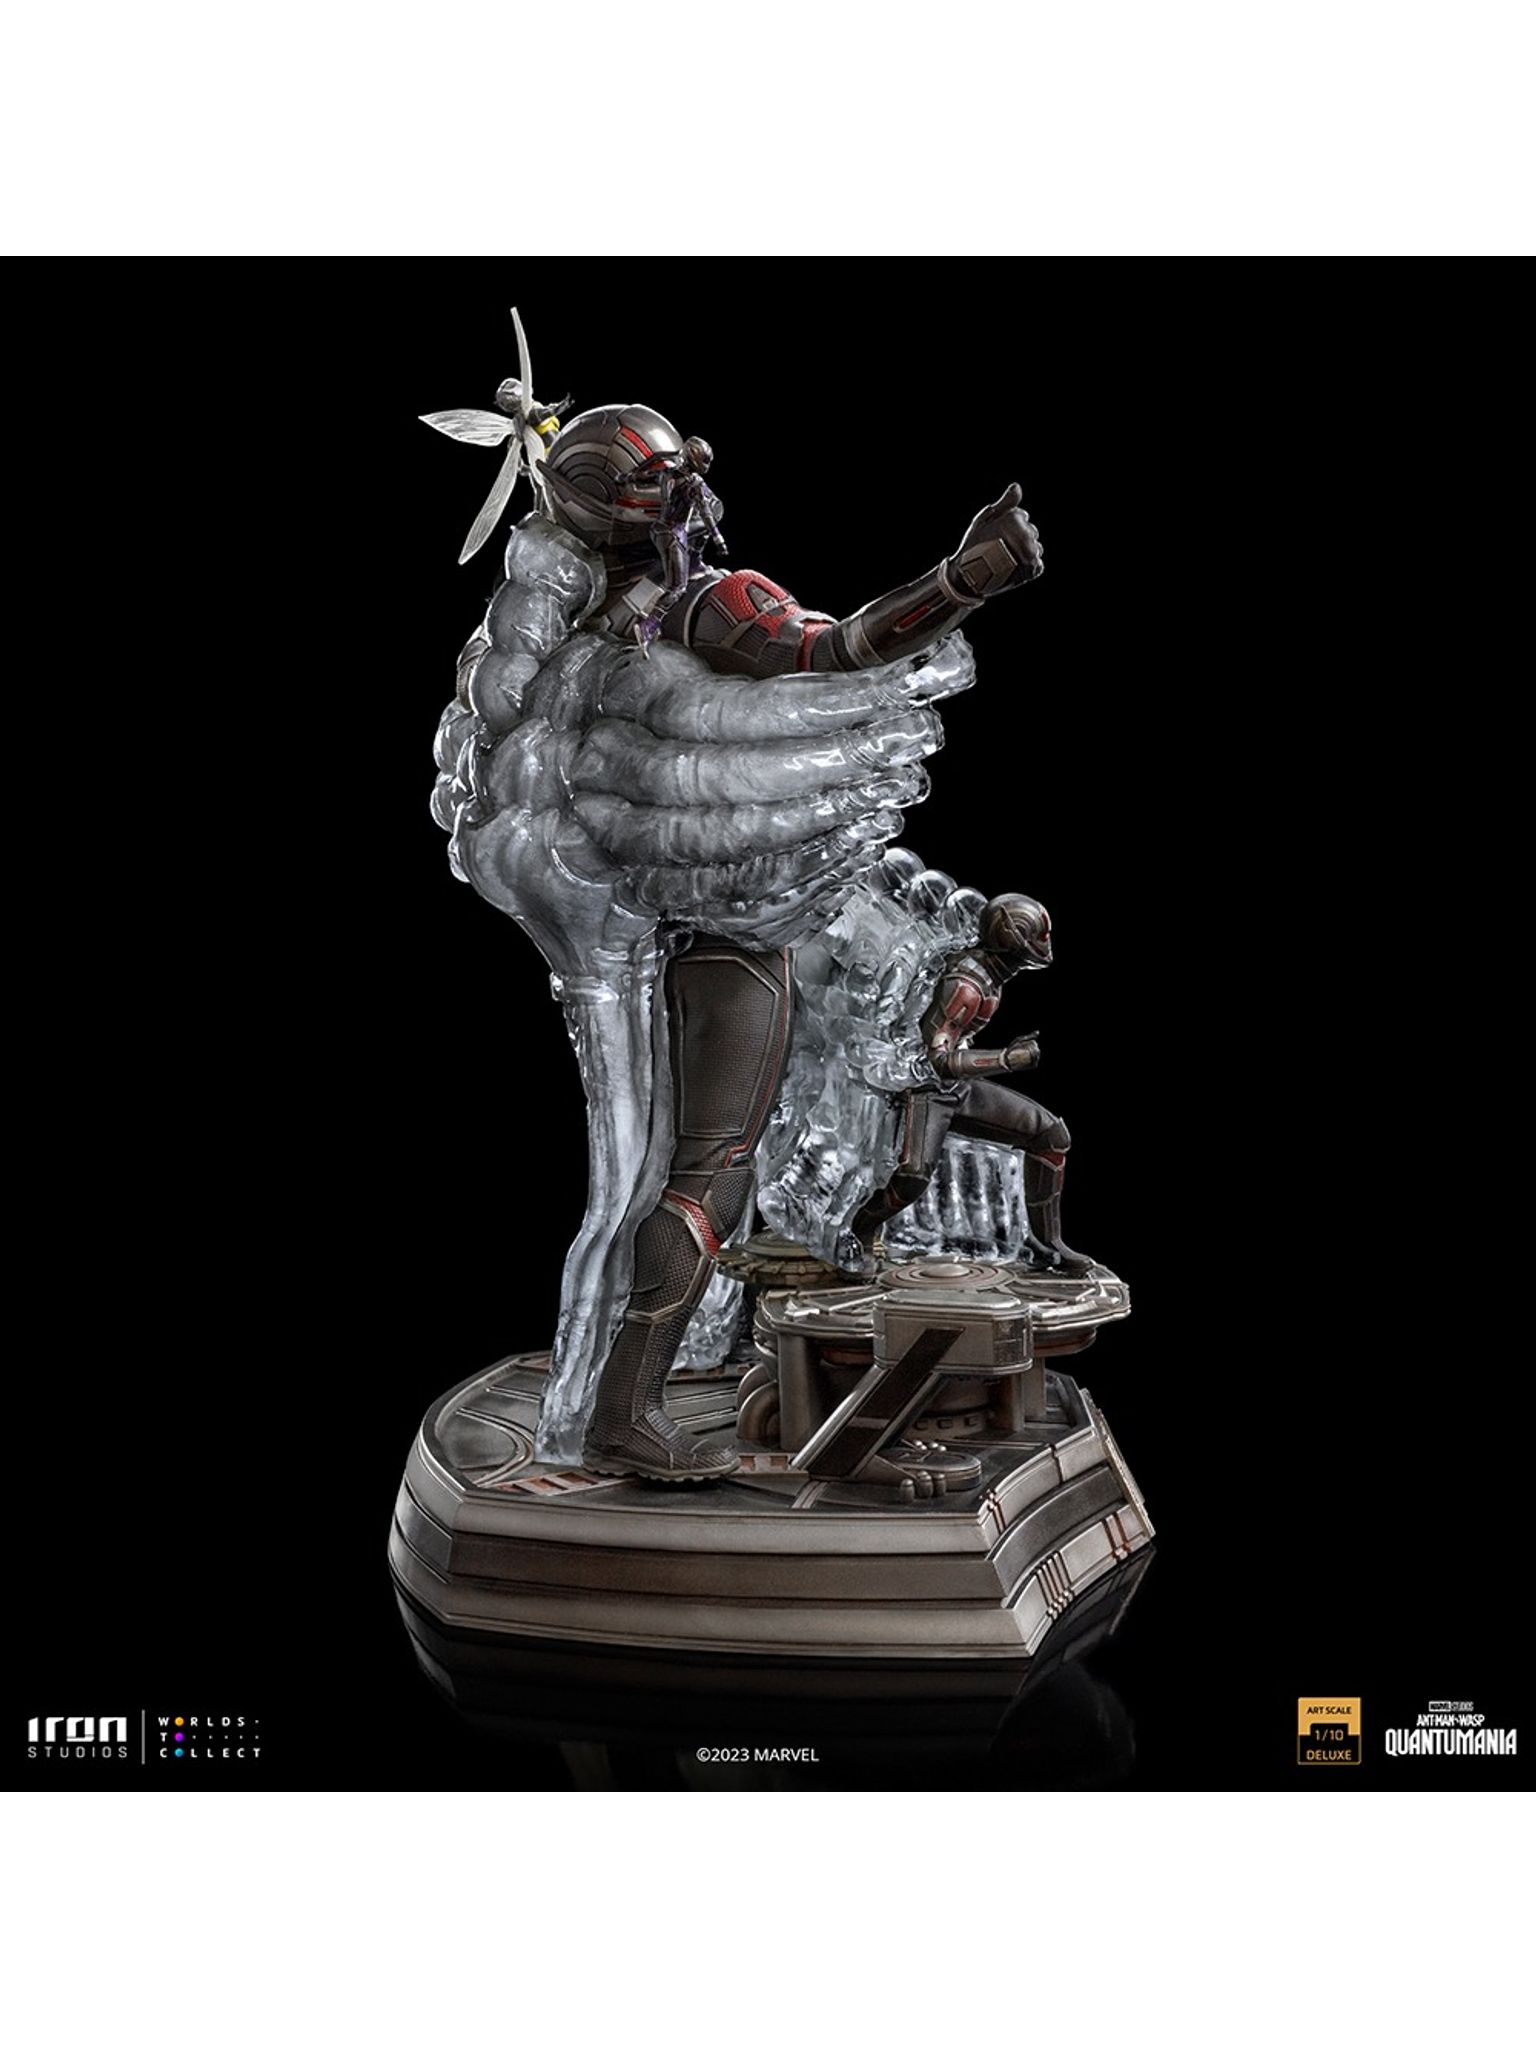 IRON STUDIOS : Ant-Man and the Wasp Quantumania - Statue Ant-Man and the Wasp - Art Scale 1/10 207883-1536-2048?v=638170908186500000&width=1536&height=2048&aspect=true